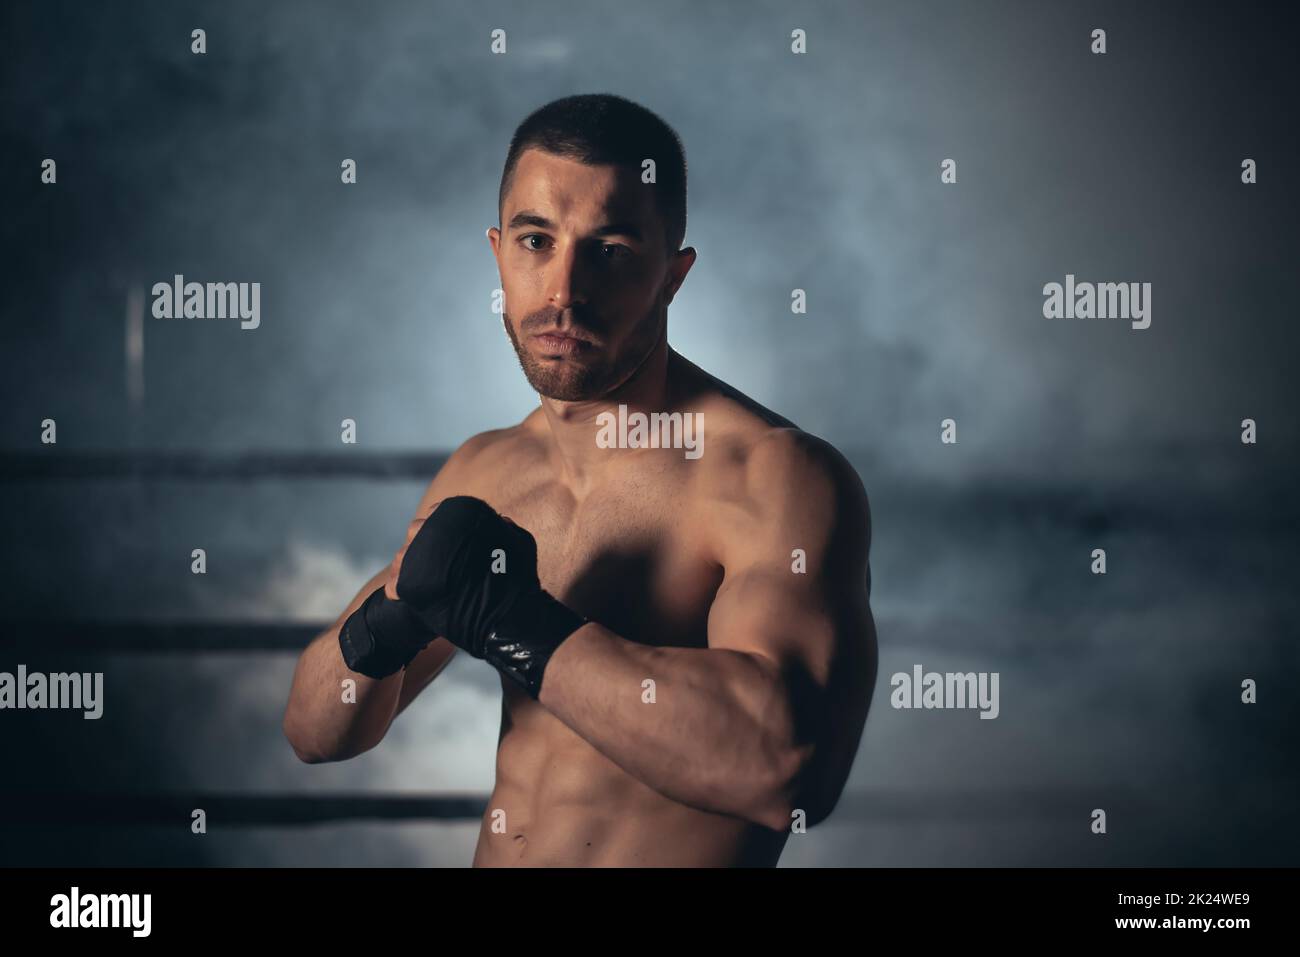 Mixed martial artist posing in a ring. High quality photo Stock Photo